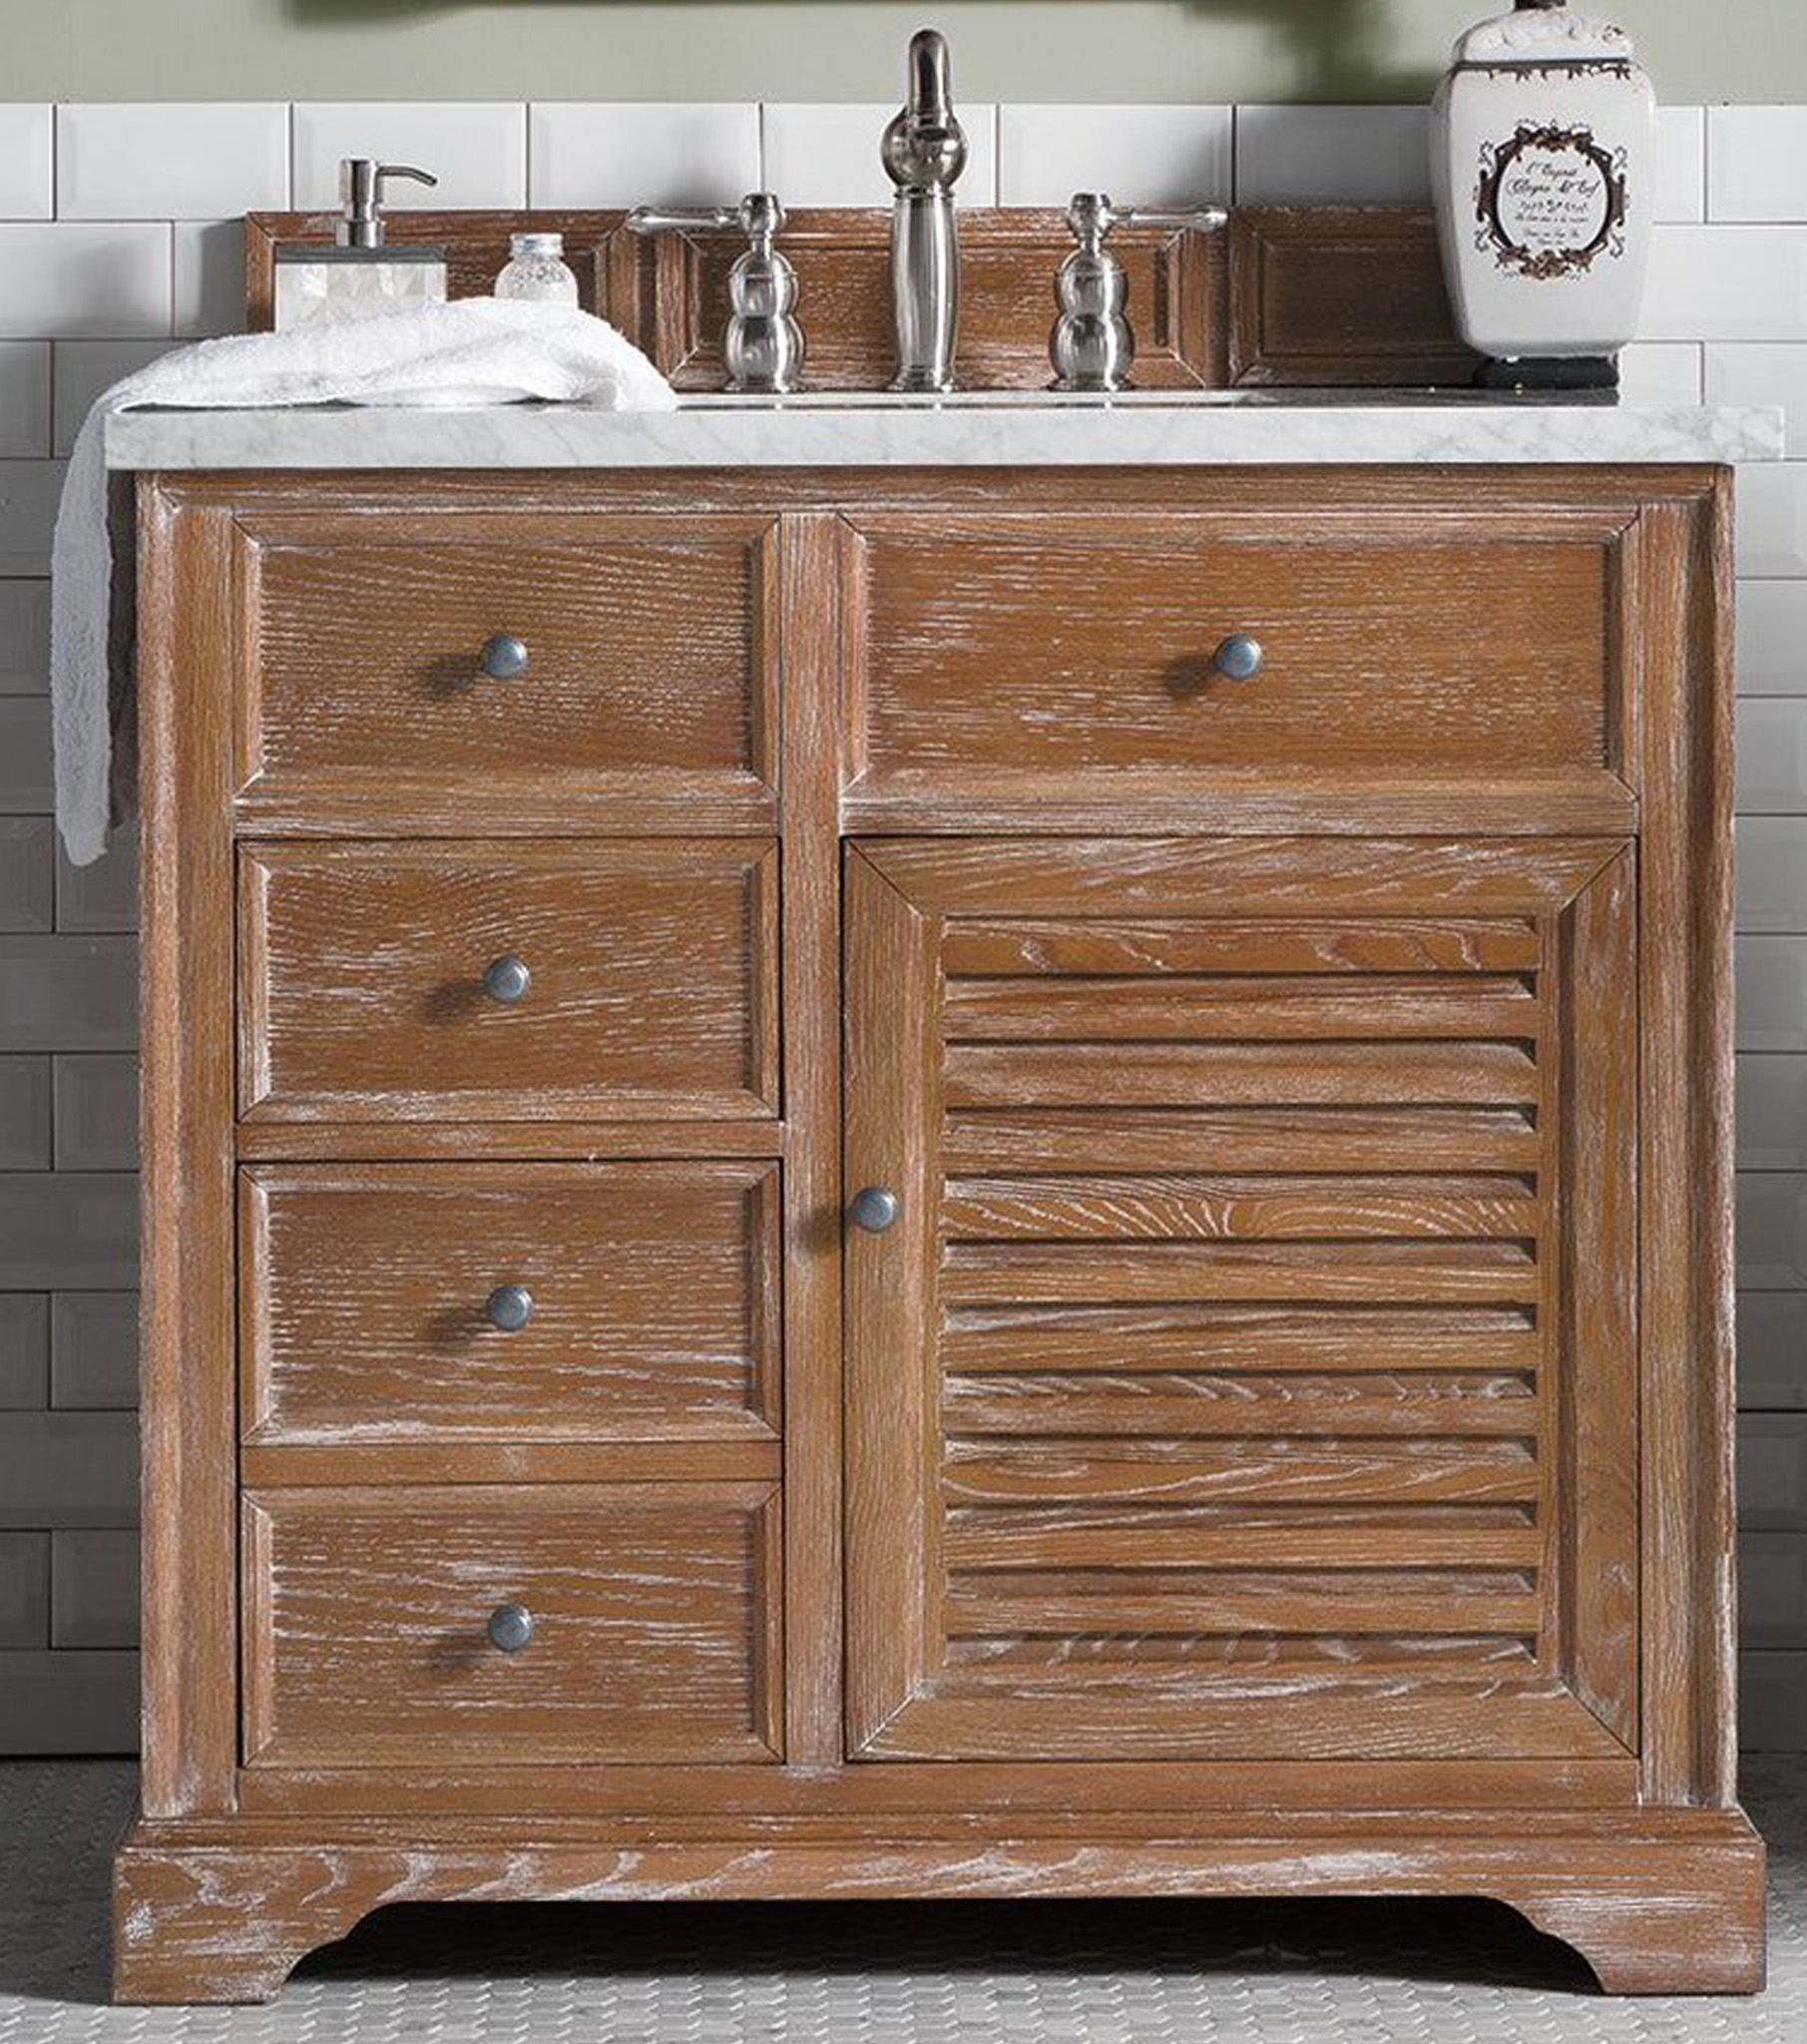 James Martin, Savannah Collection, 36 inch Bathroom Vanity in Driftwood Finish, with Top options